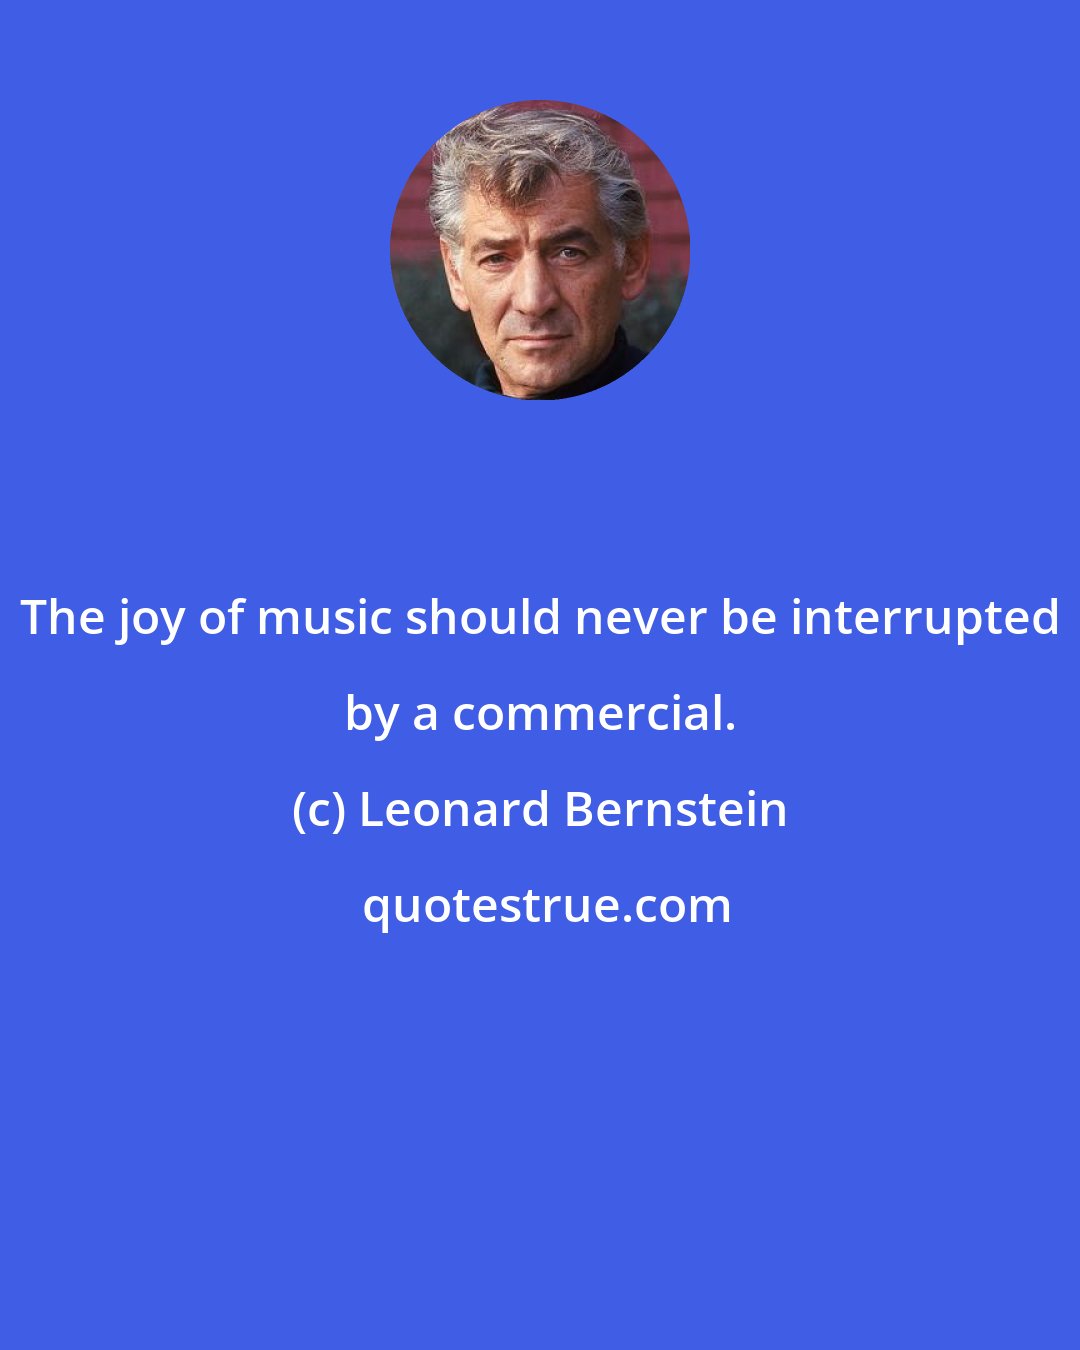 Leonard Bernstein: The joy of music should never be interrupted by a commercial.